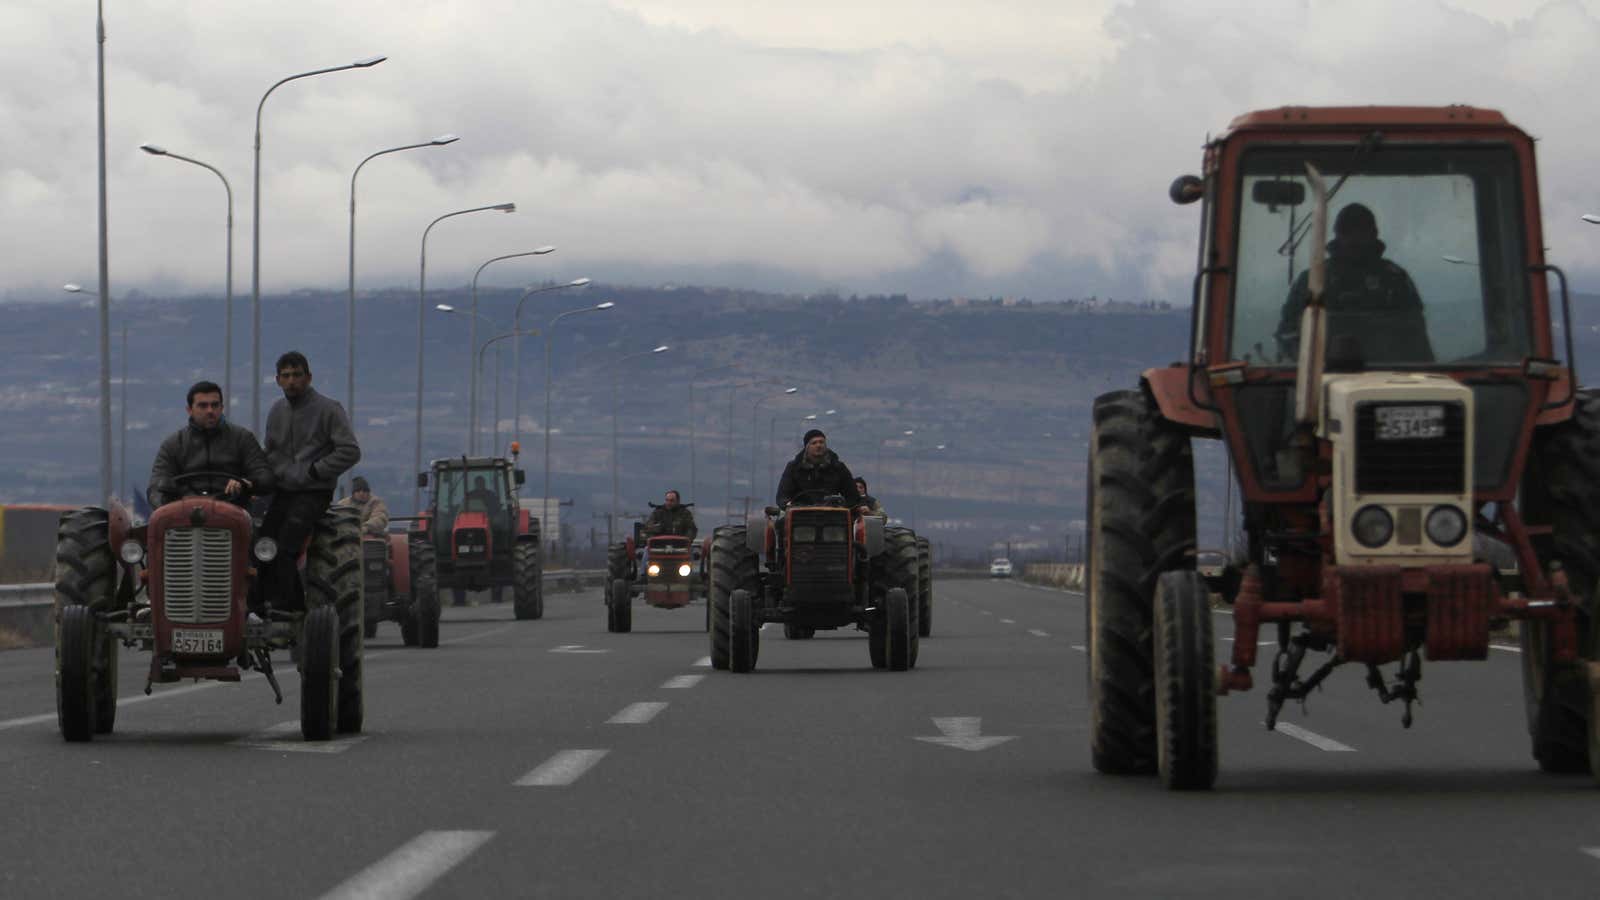 Farmers drive their tractors on Egnatia highway near the northern Greek city of Veria.